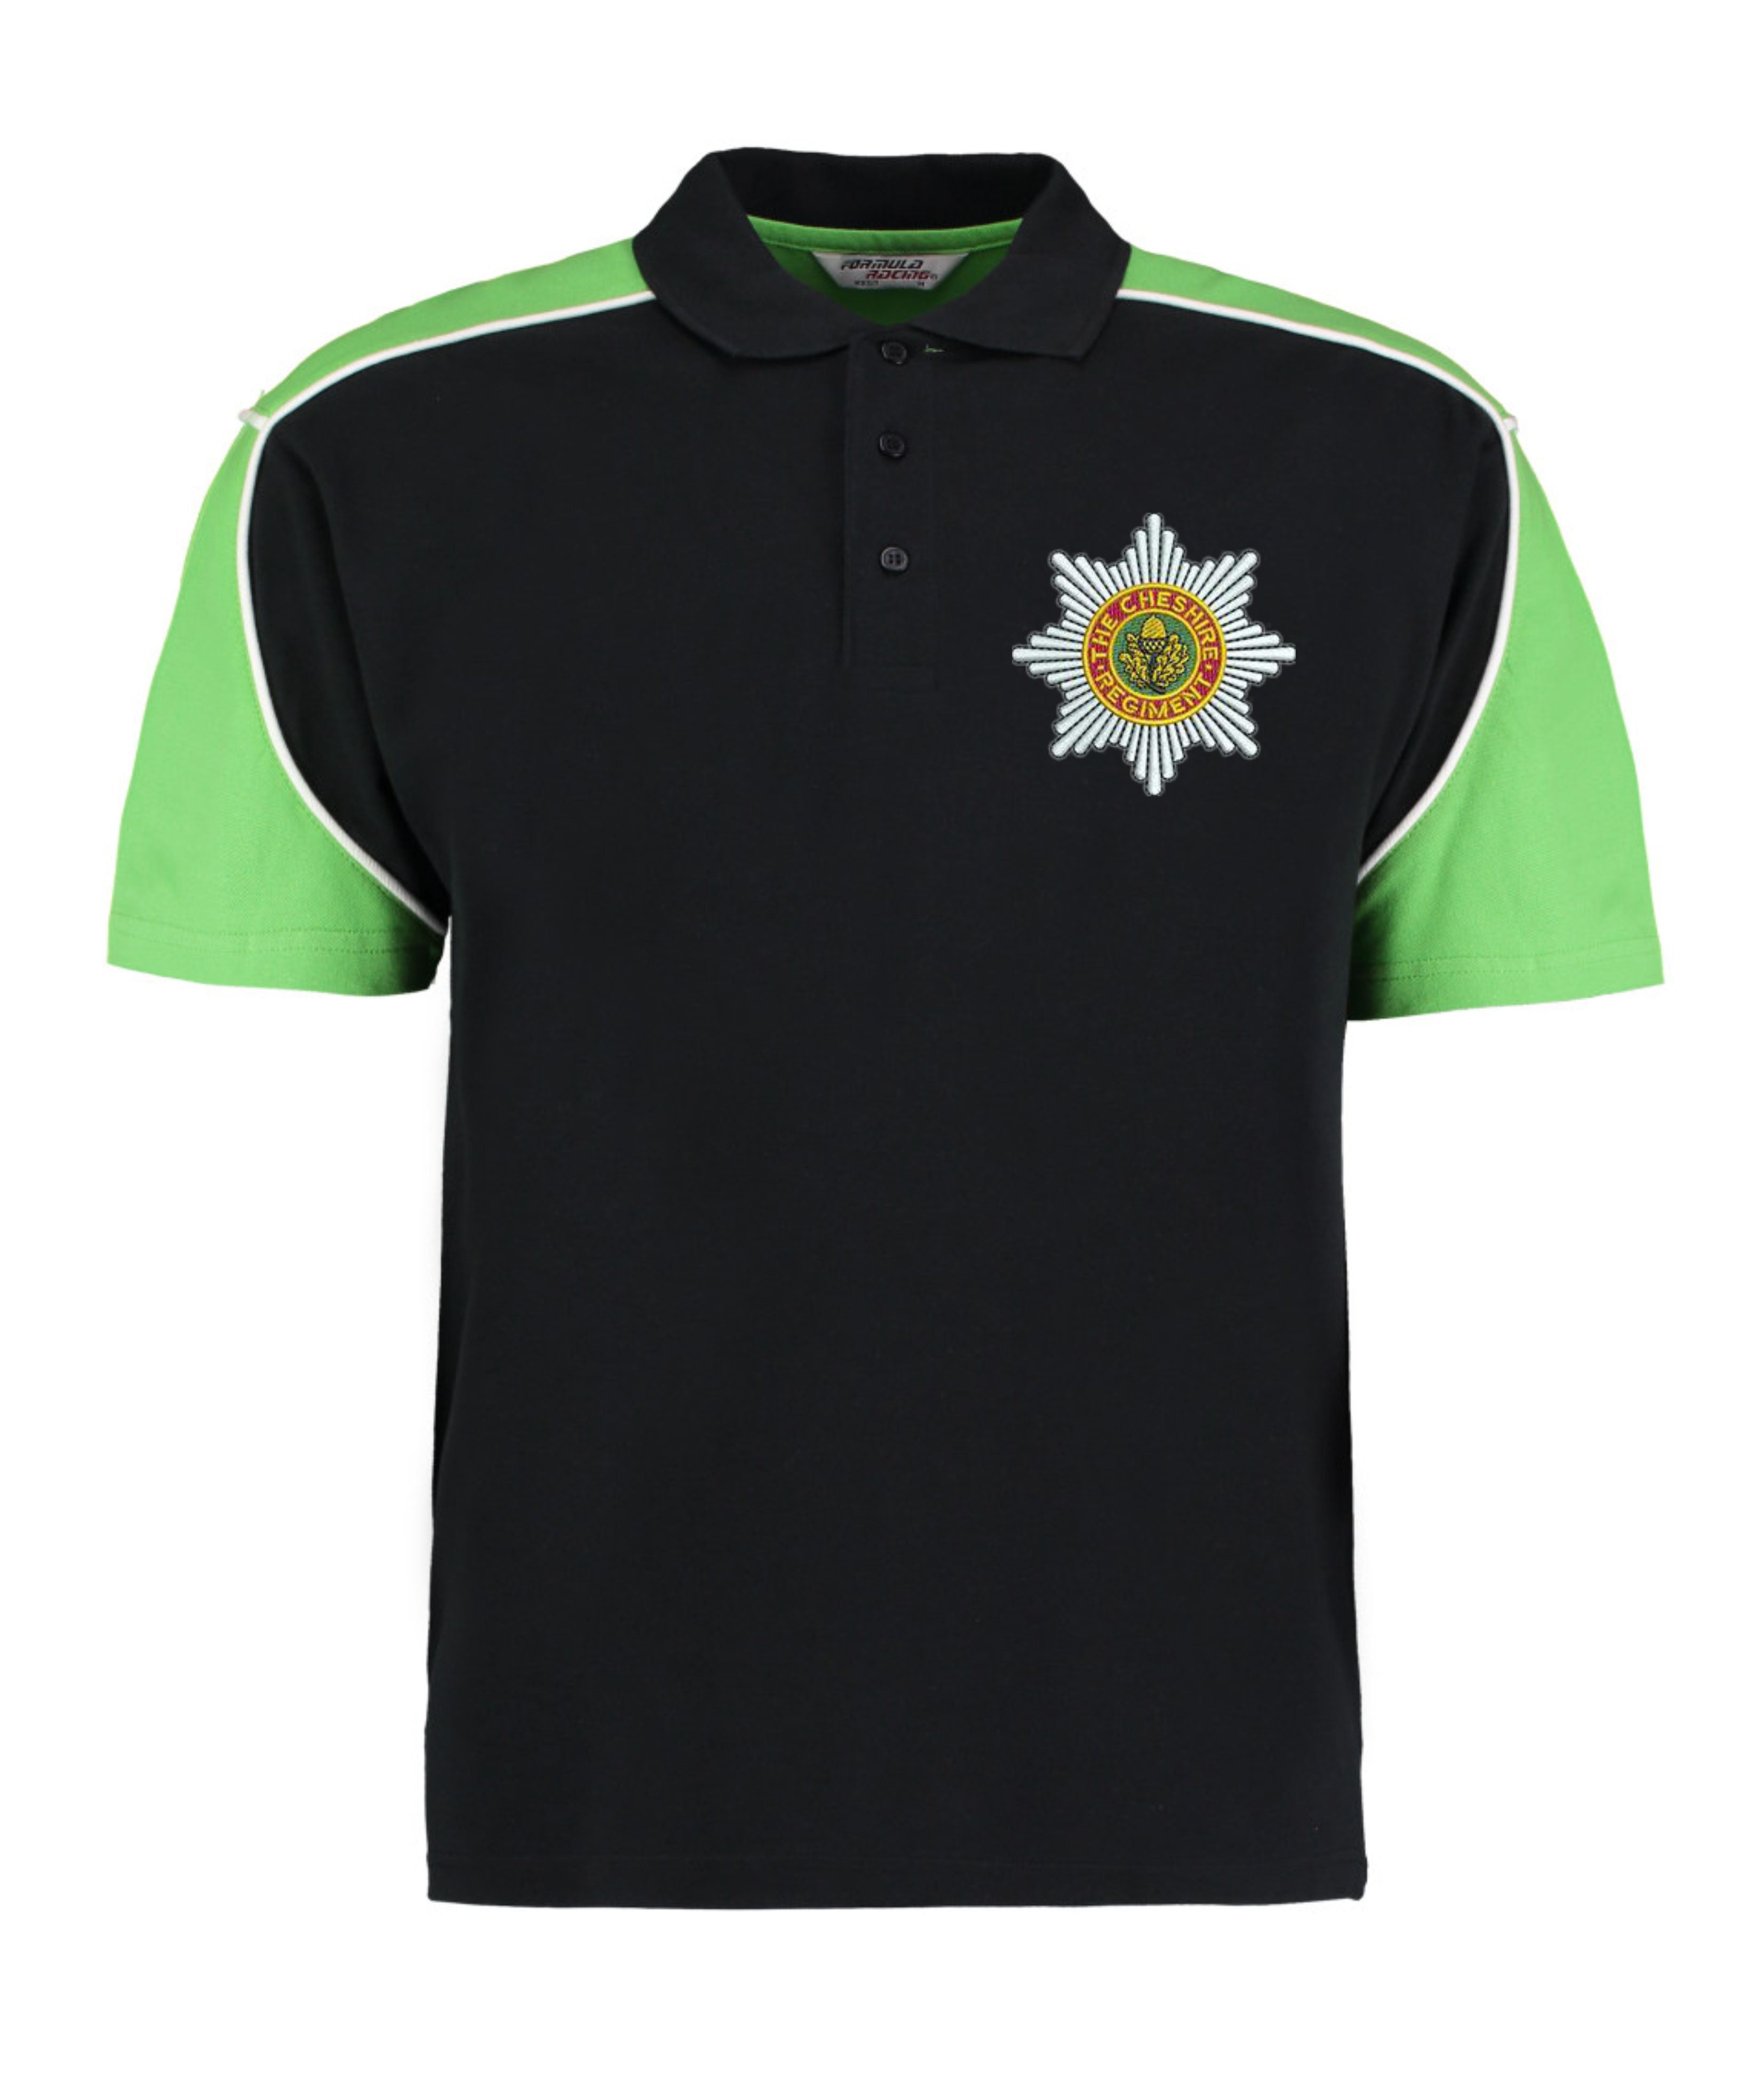 The Cheshire Regiment sport polo